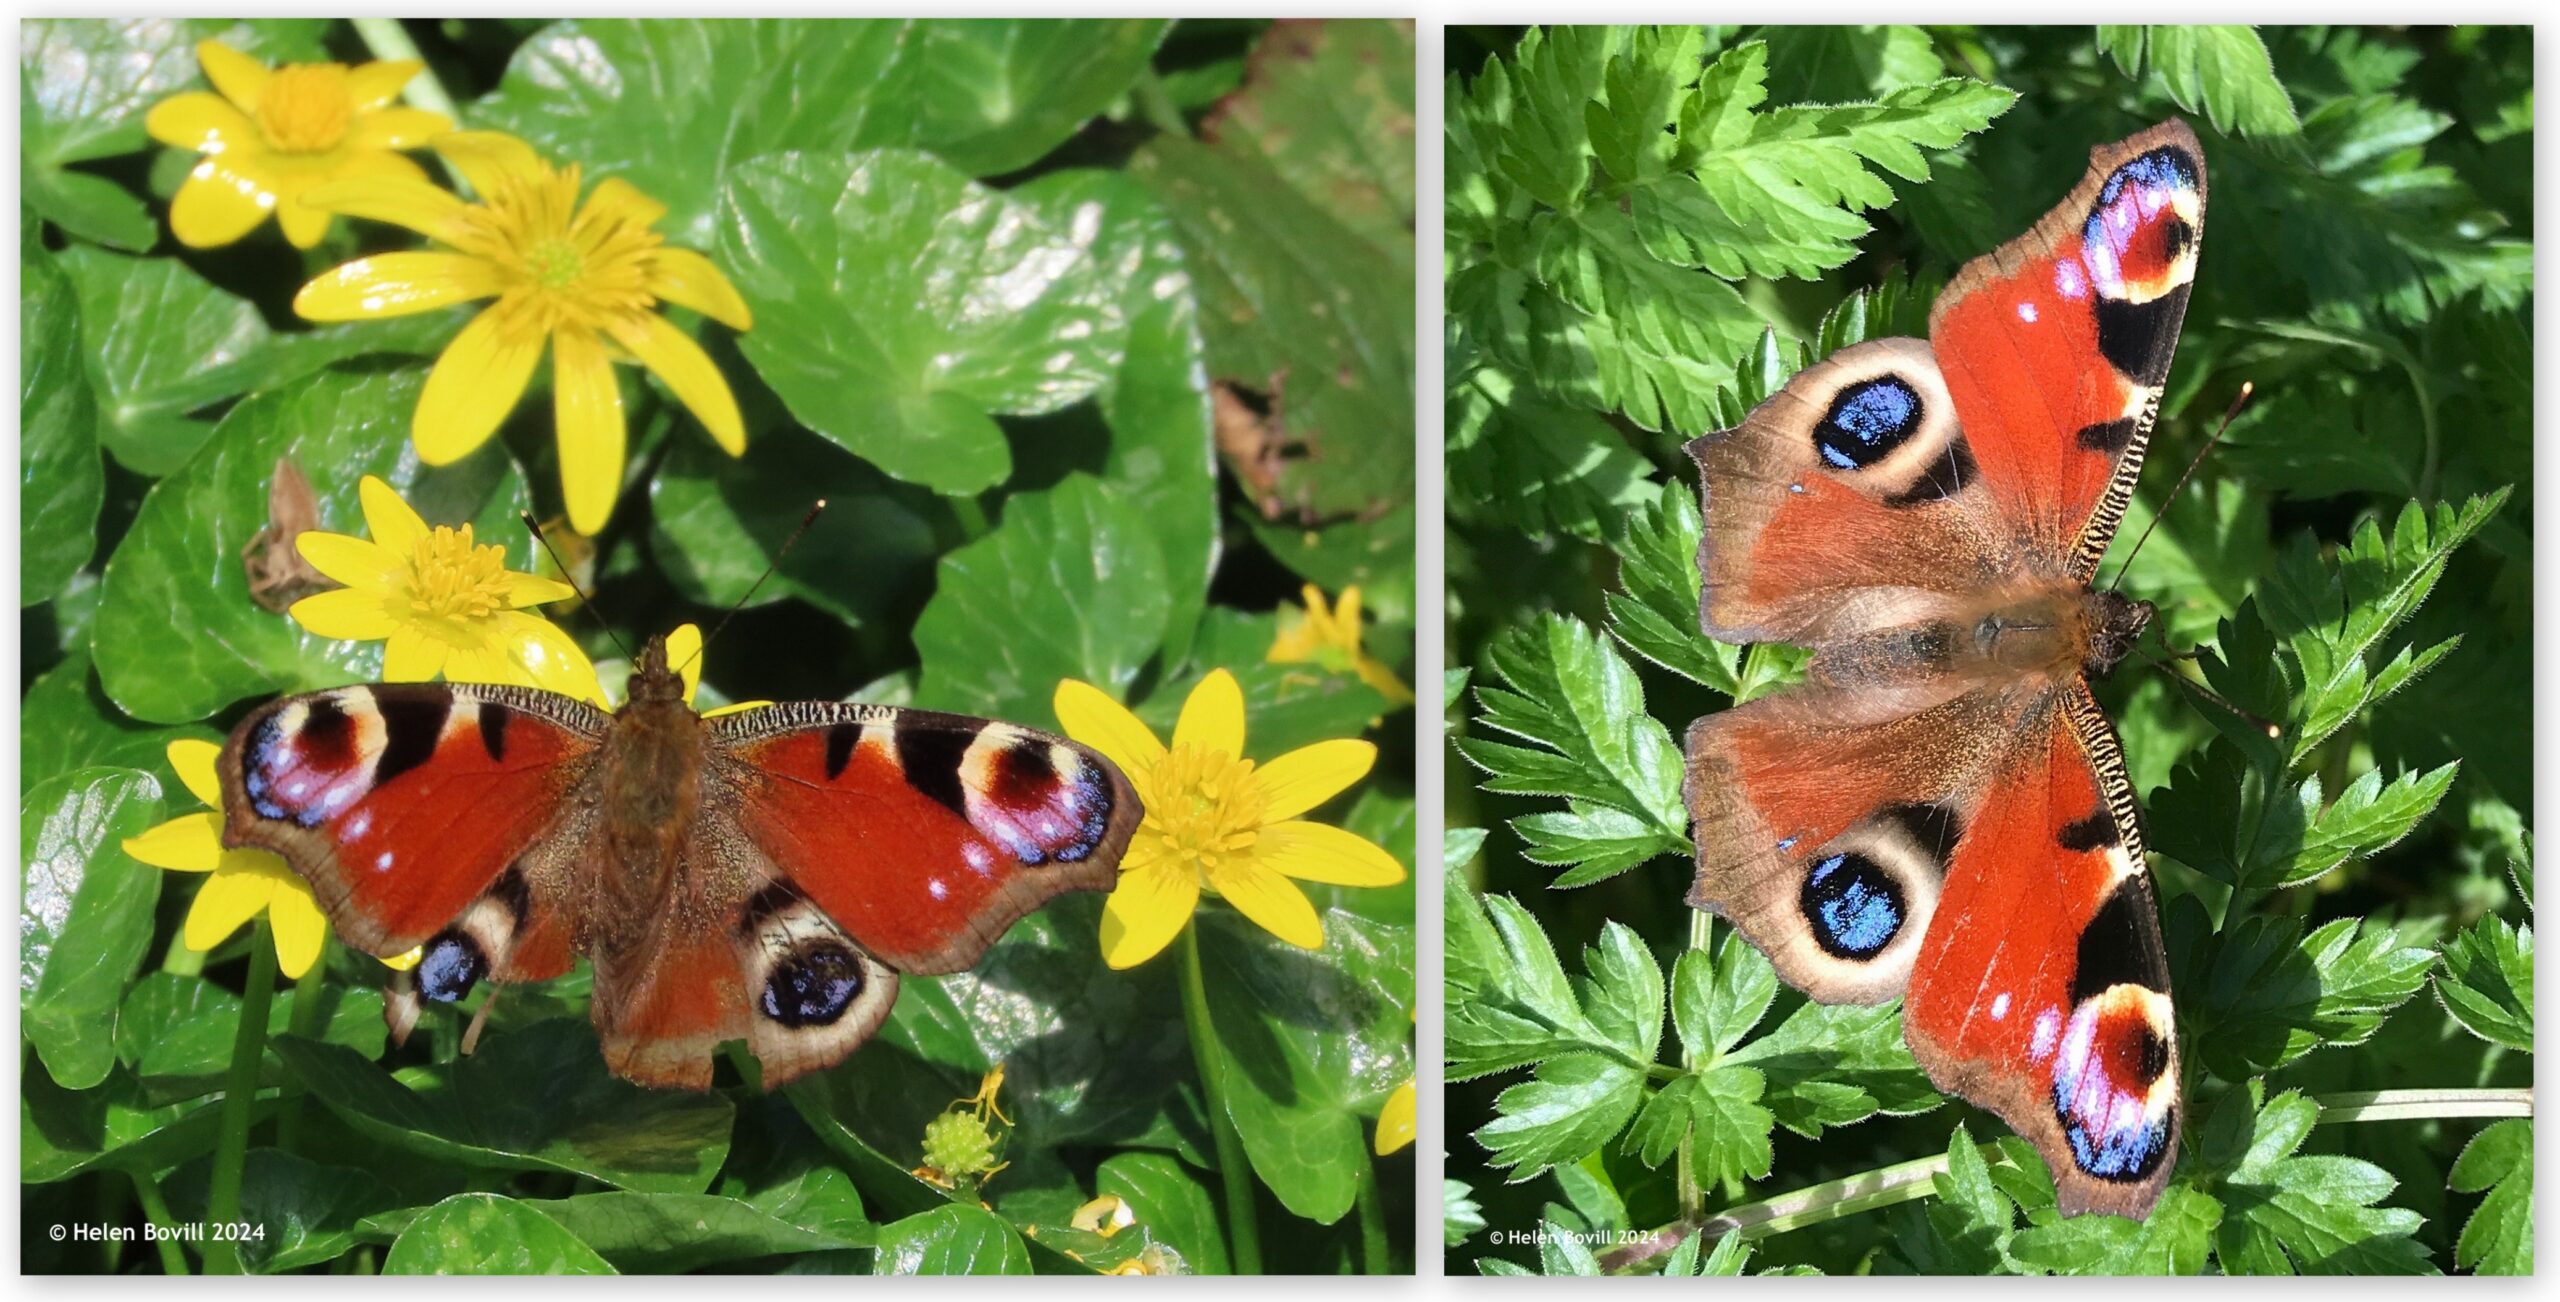 Two photos, each showing a Peacock butterfly on celandines and leaves